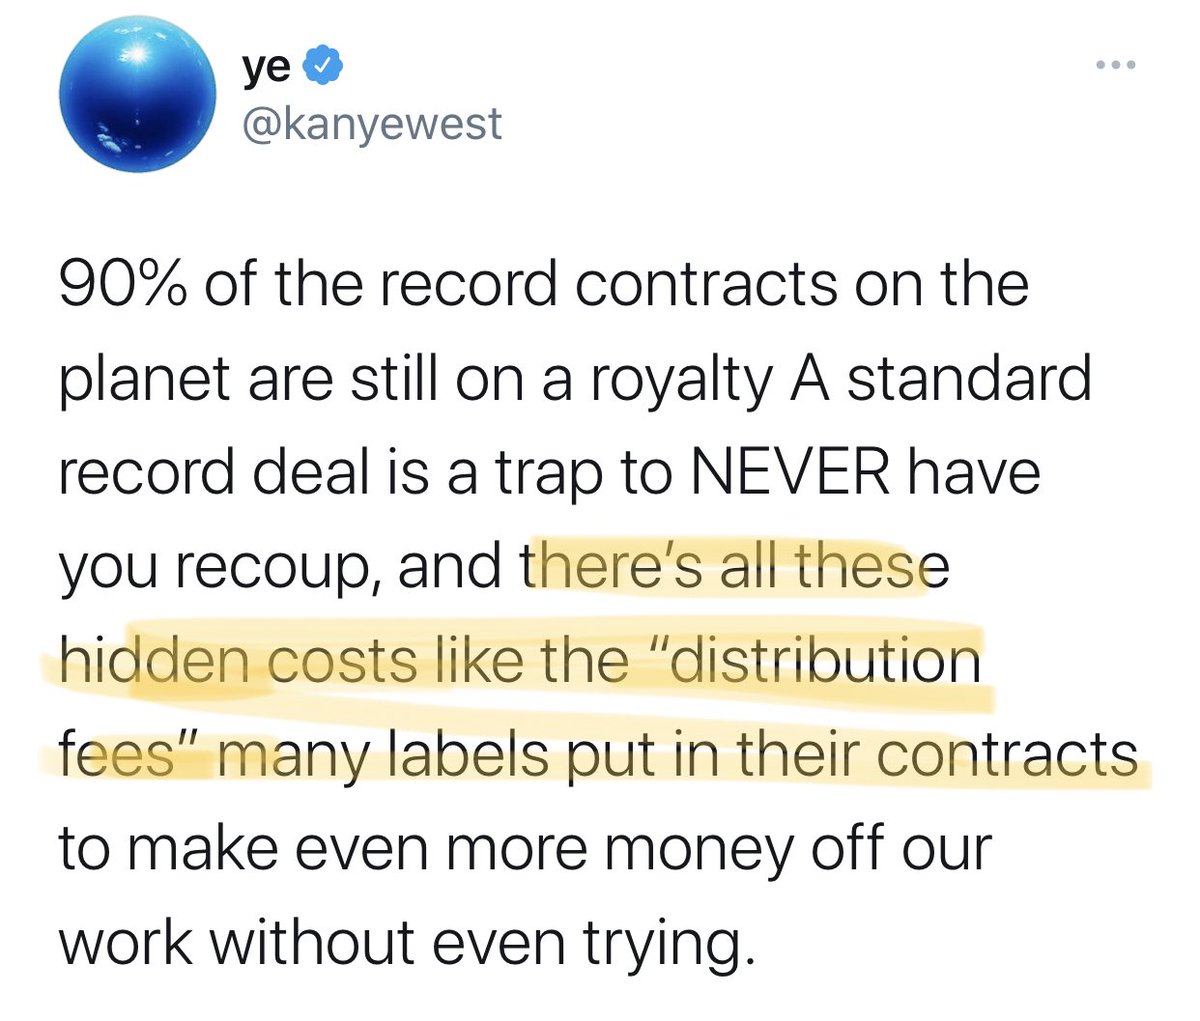 Kanye has been in a P&D (pressing and DISTRIBUTION) agreement with the label since 2012 but talmbout hidden distribution fees in 2020?This is y’all’s man?